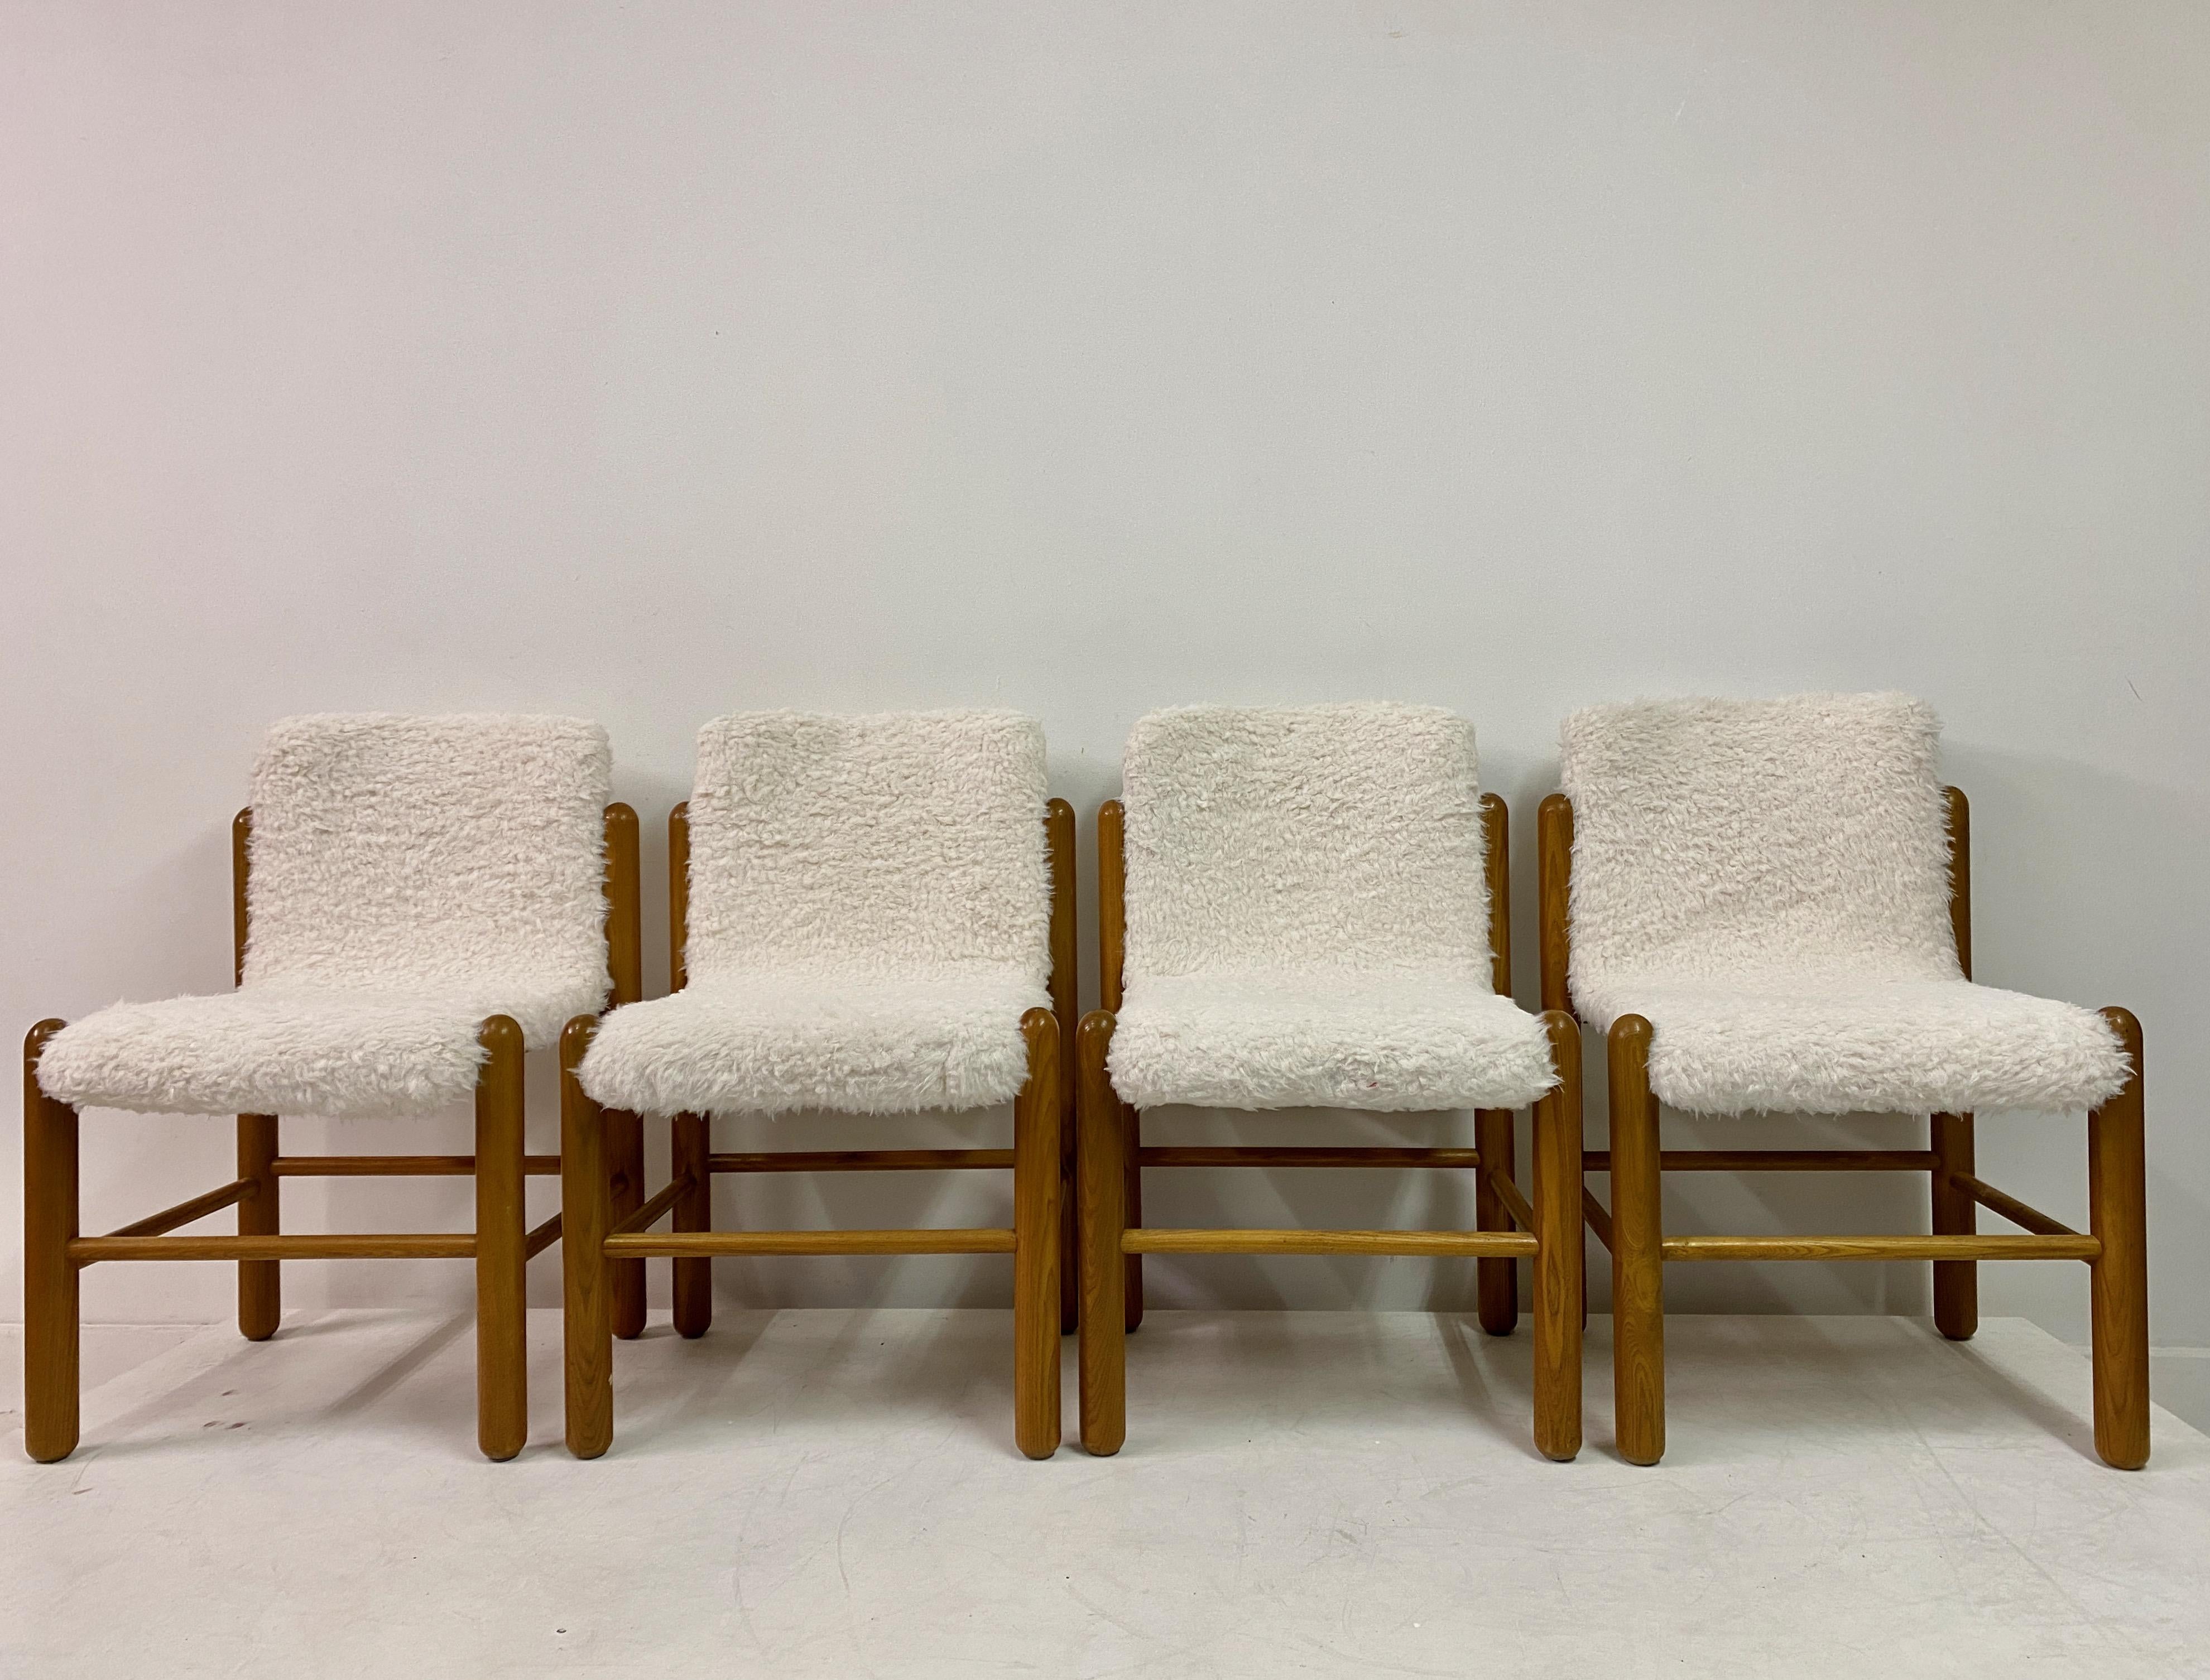 Four dining chairs

Pine frames

Soft faux fur upholstery

Probably Italian 1970s/1980s

Seat height 48cm.